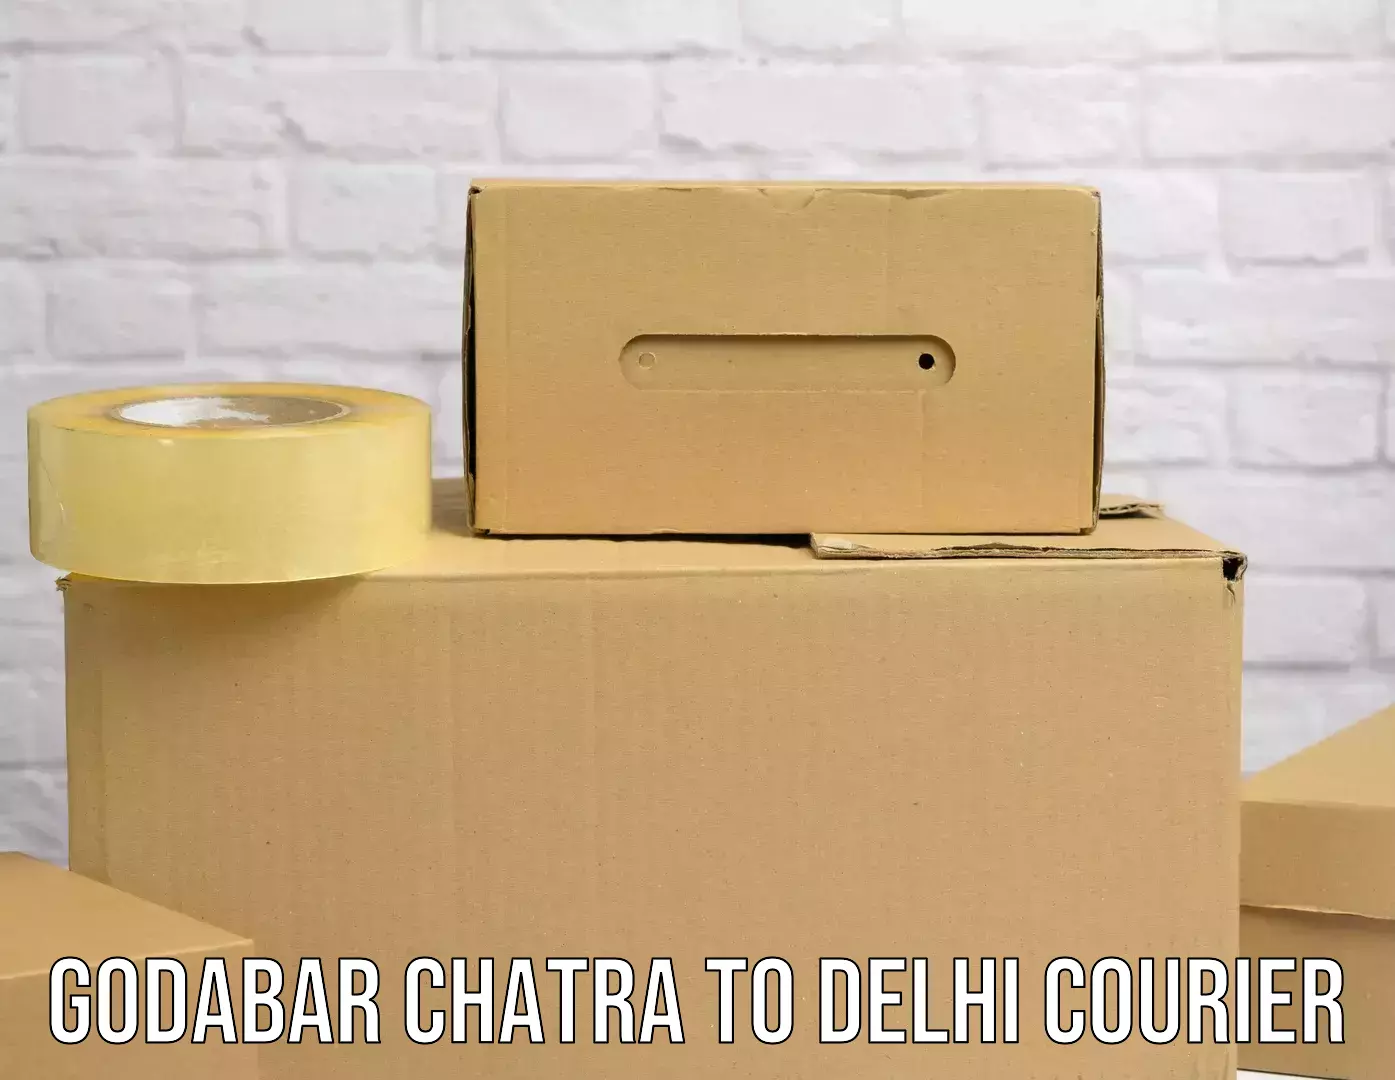 Next day courier Godabar Chatra to NCR